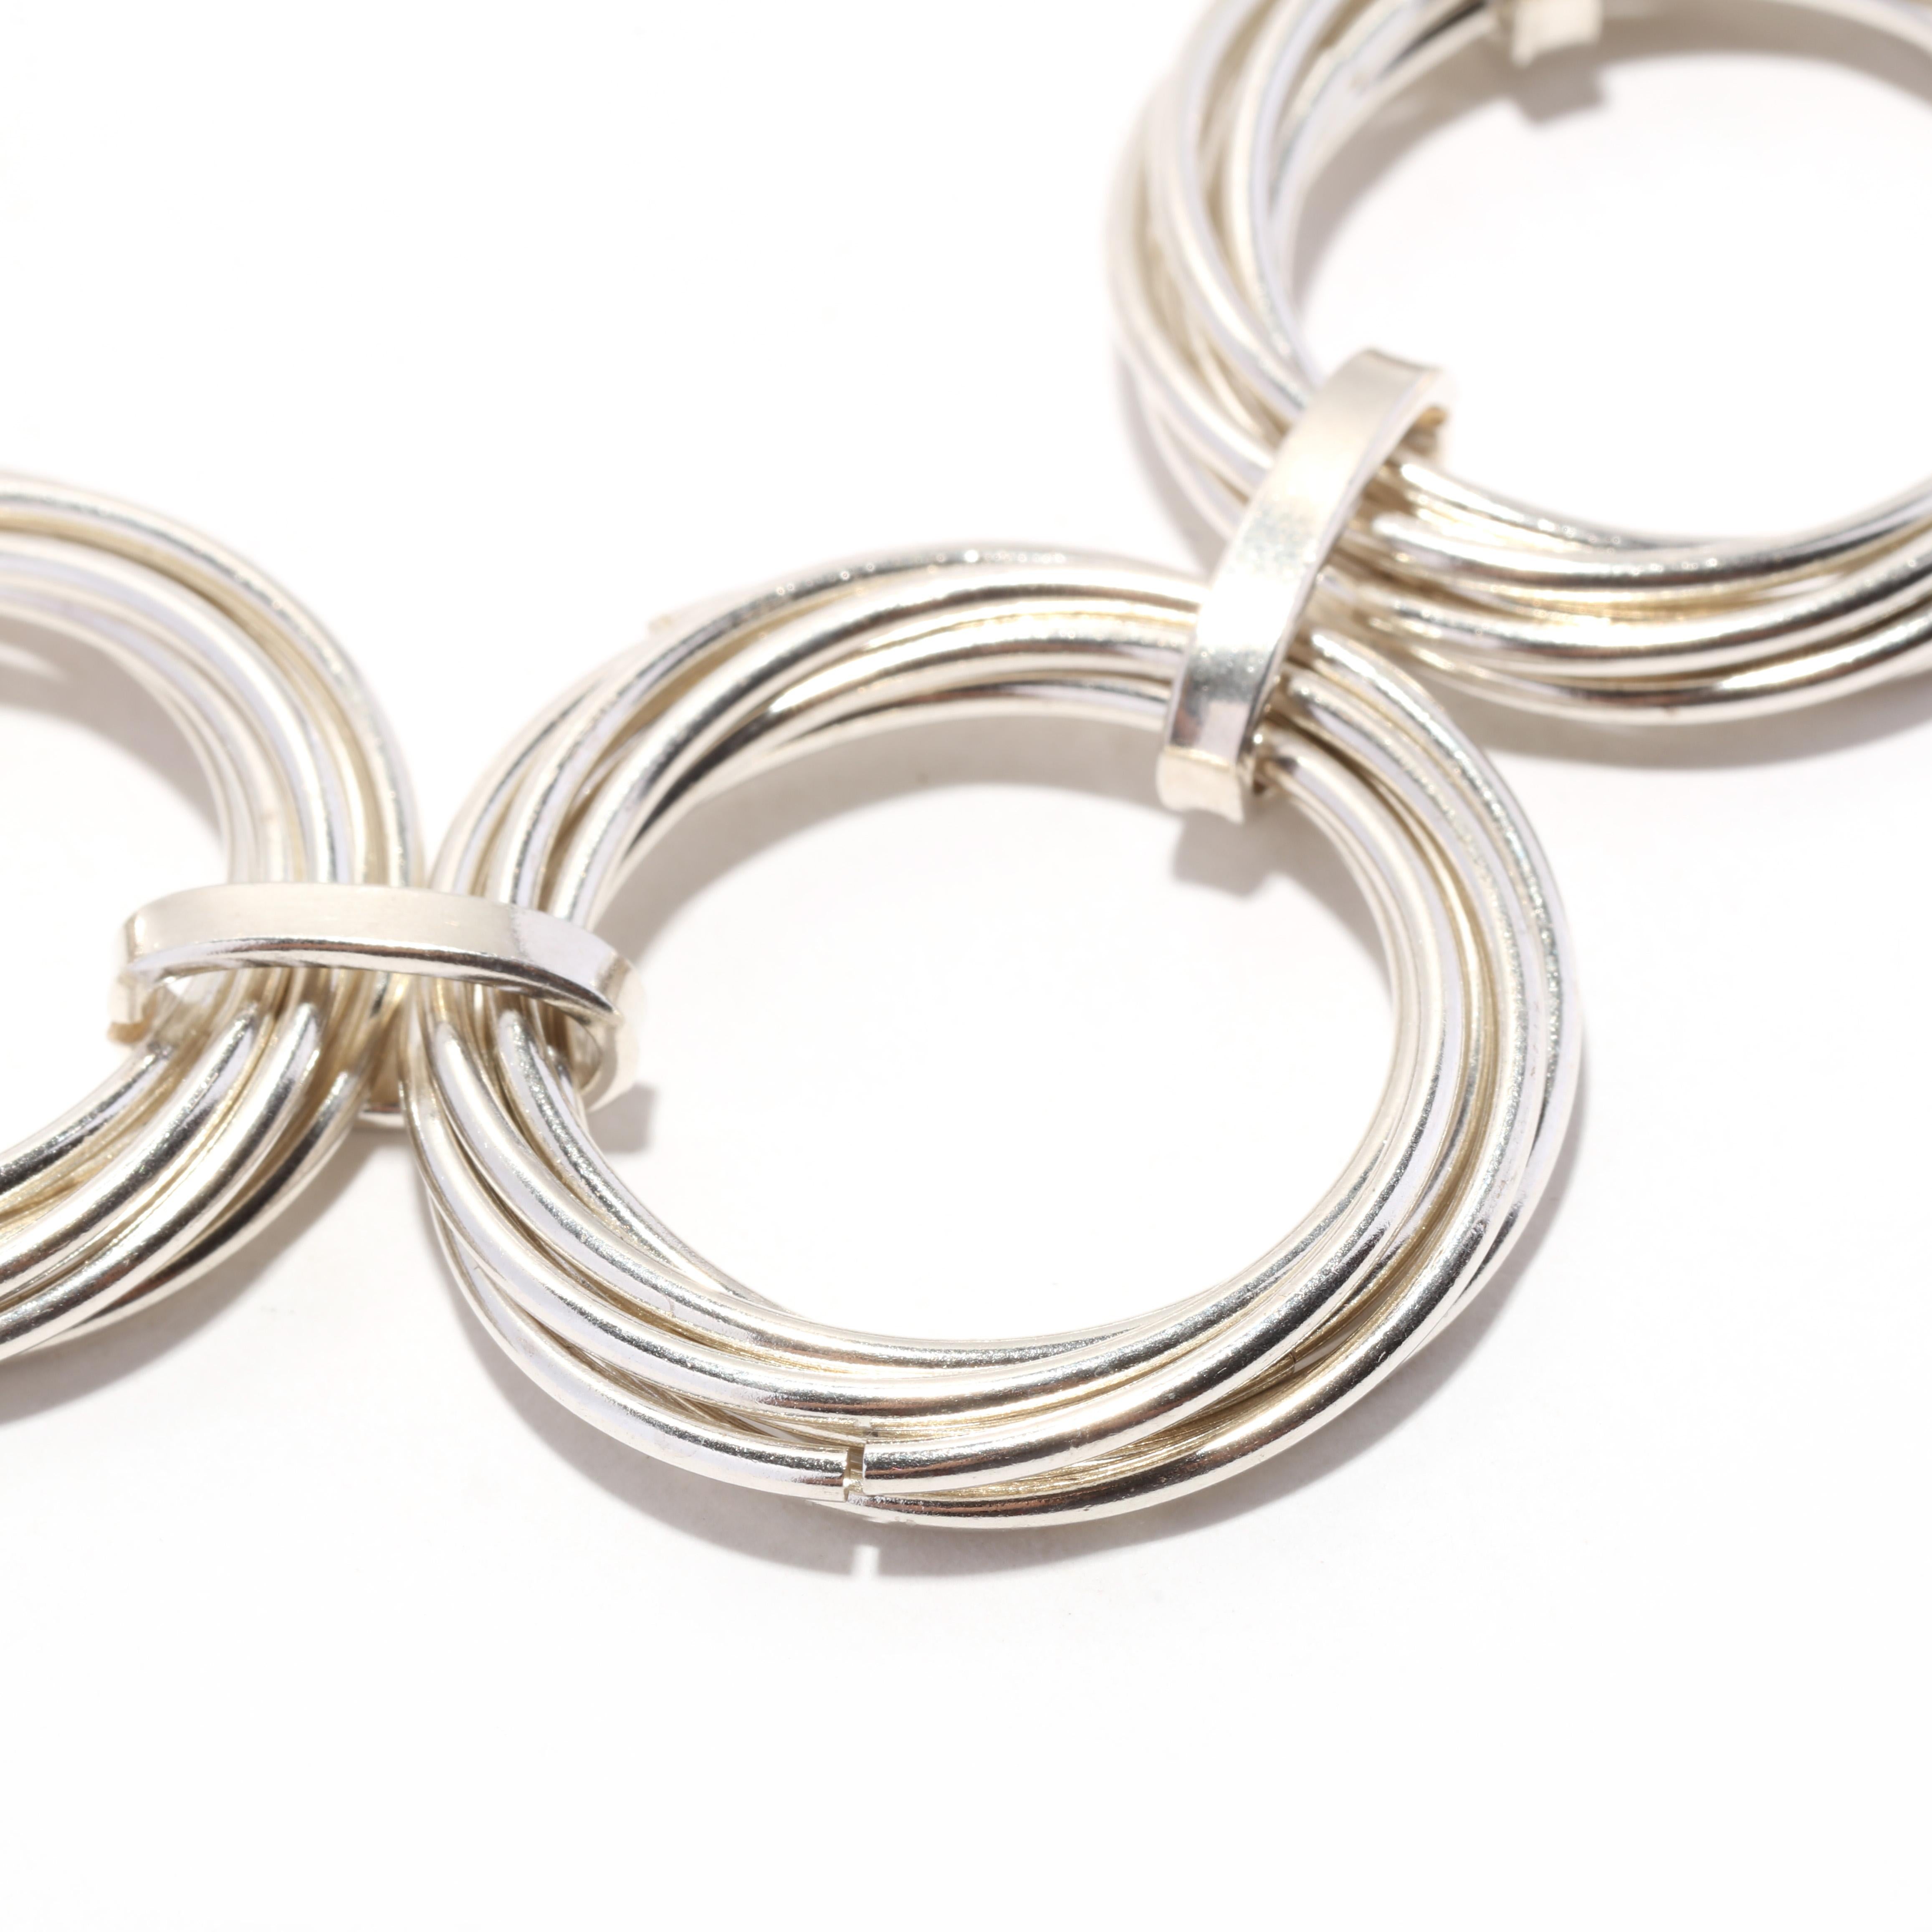 This modern sterling silver circle link bracelet is the perfect addition to any jewelry collection. The toggle closure allows you to easily slip the bracelet on and off while maintaining a secure fit. Measuring 8 inches long, the bracelet is perfect